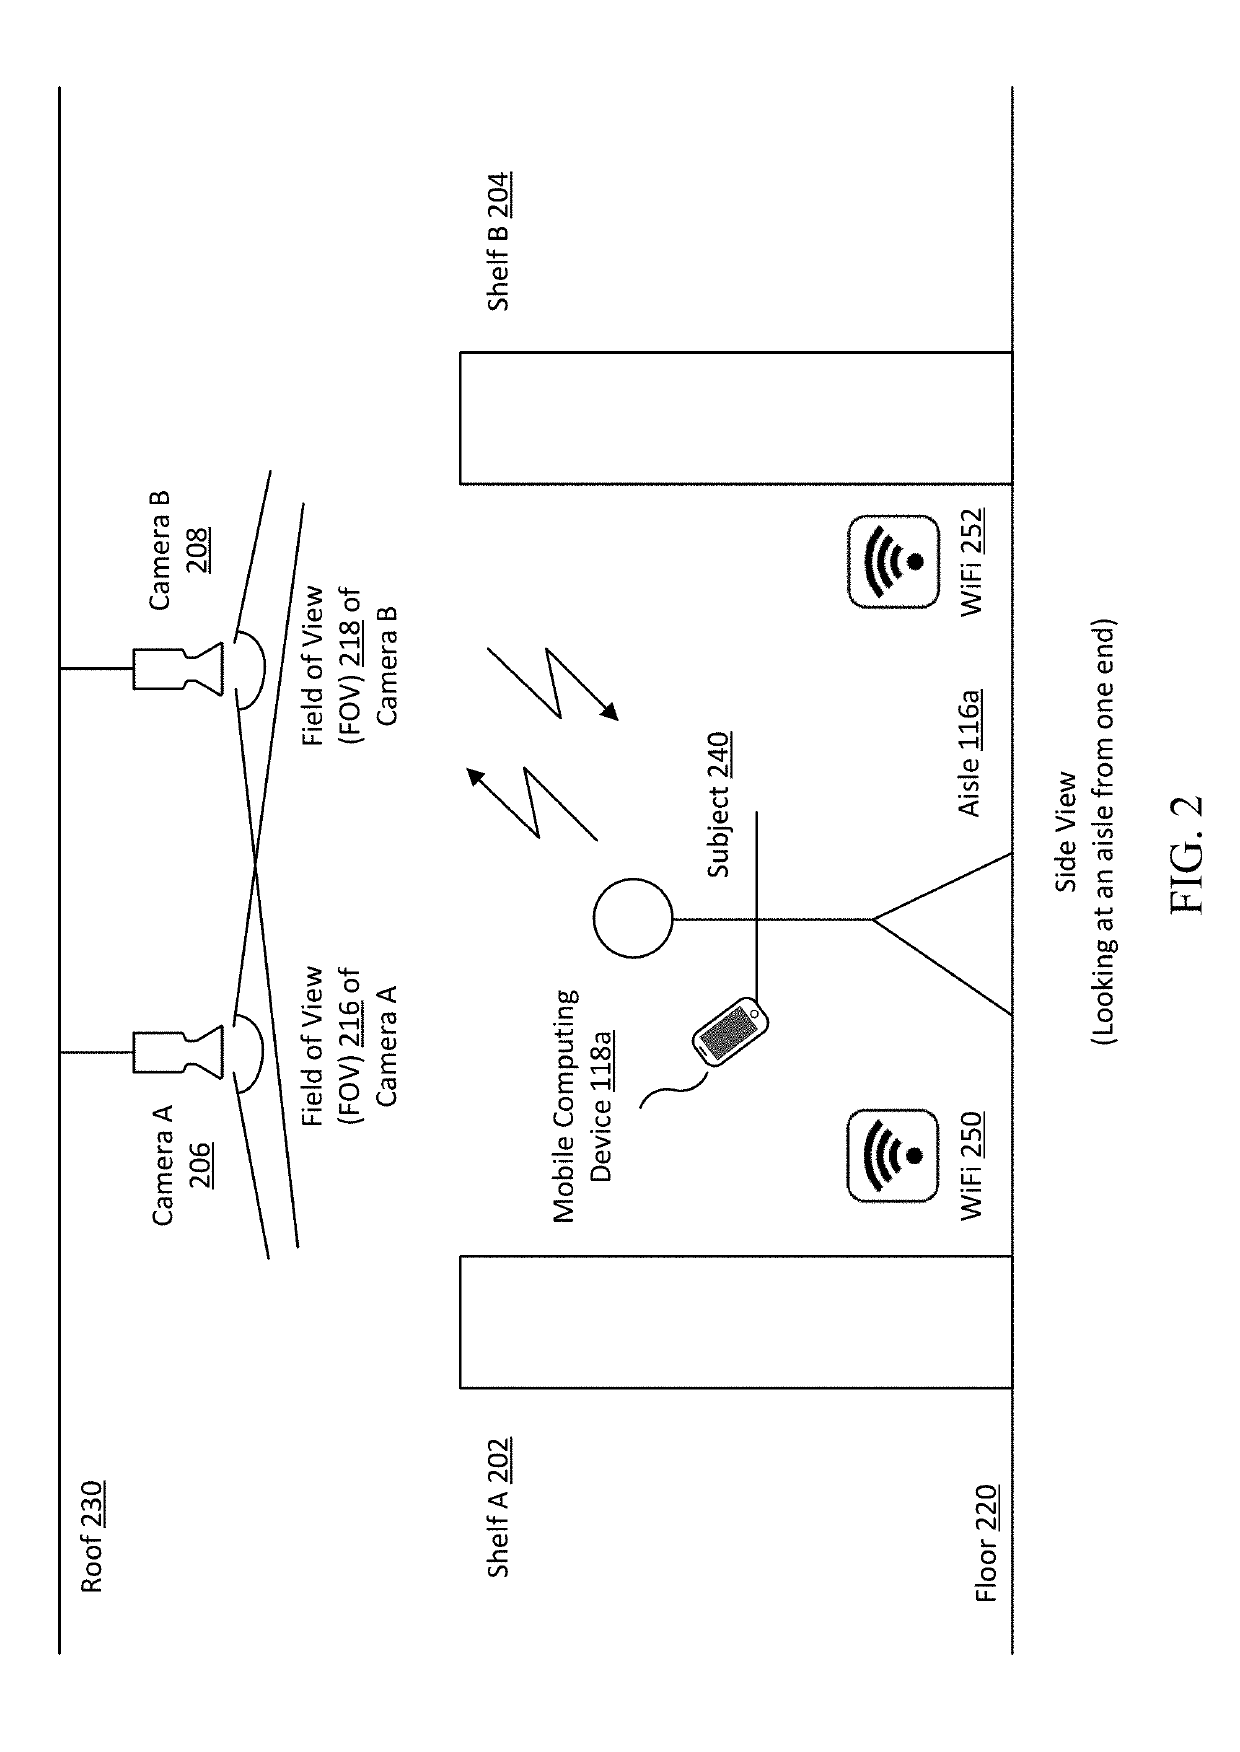 Systems and methods to check-in shoppers in a cashier-less store